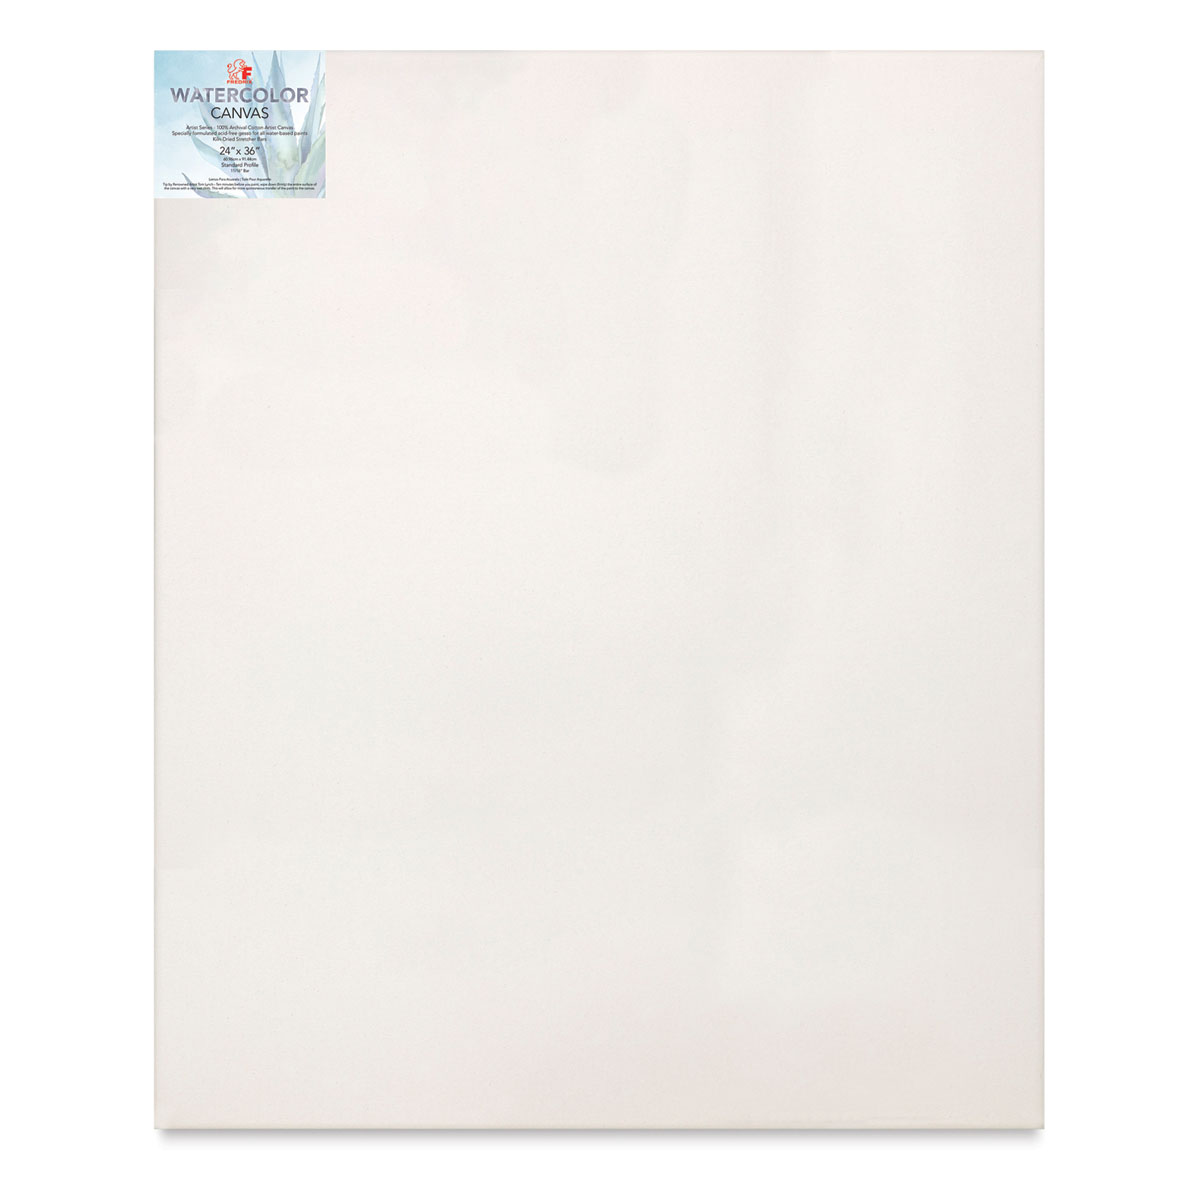 PHOENIX Painting Canvas Panels 4x4 Inch, 12 Value Pack - 8 Oz Triple Primed  100% Cotton Acid Free Canvases for Painting